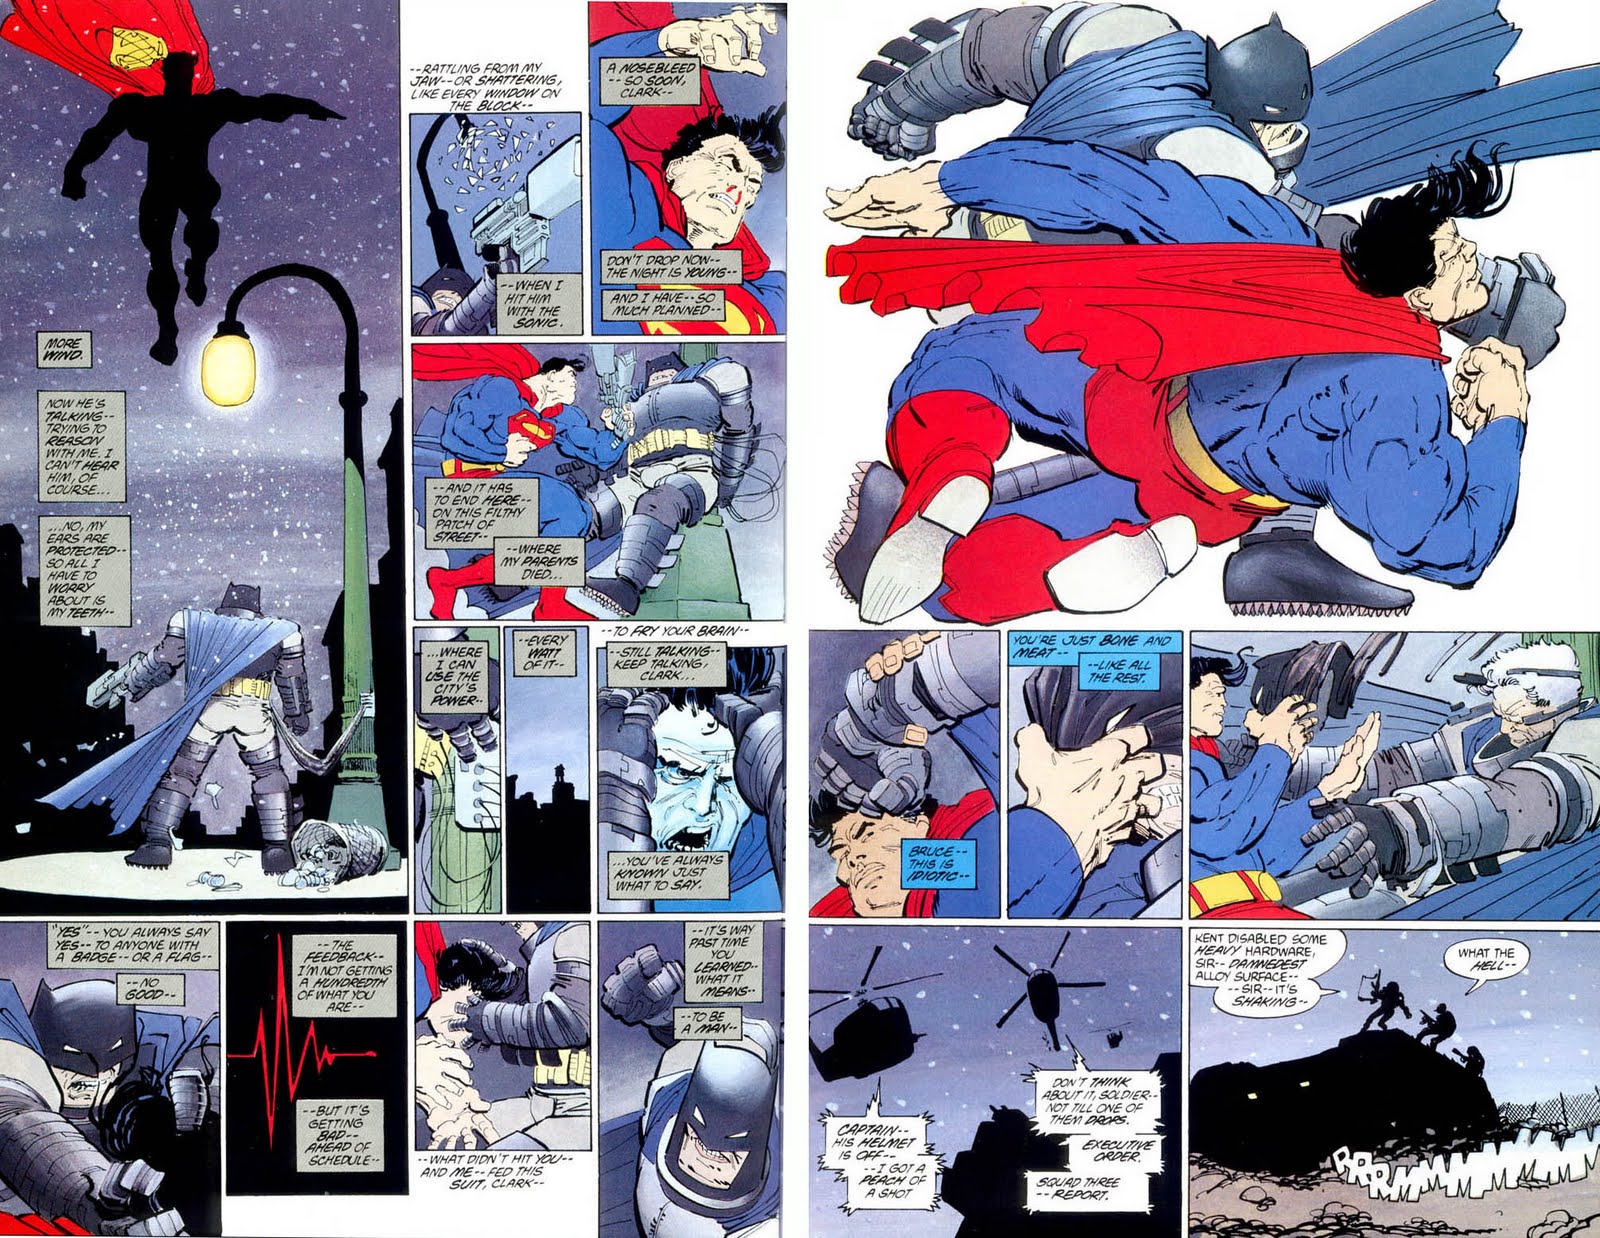 How Frank Miller's The Dark Knight Returns Brought Grit Back To Batman